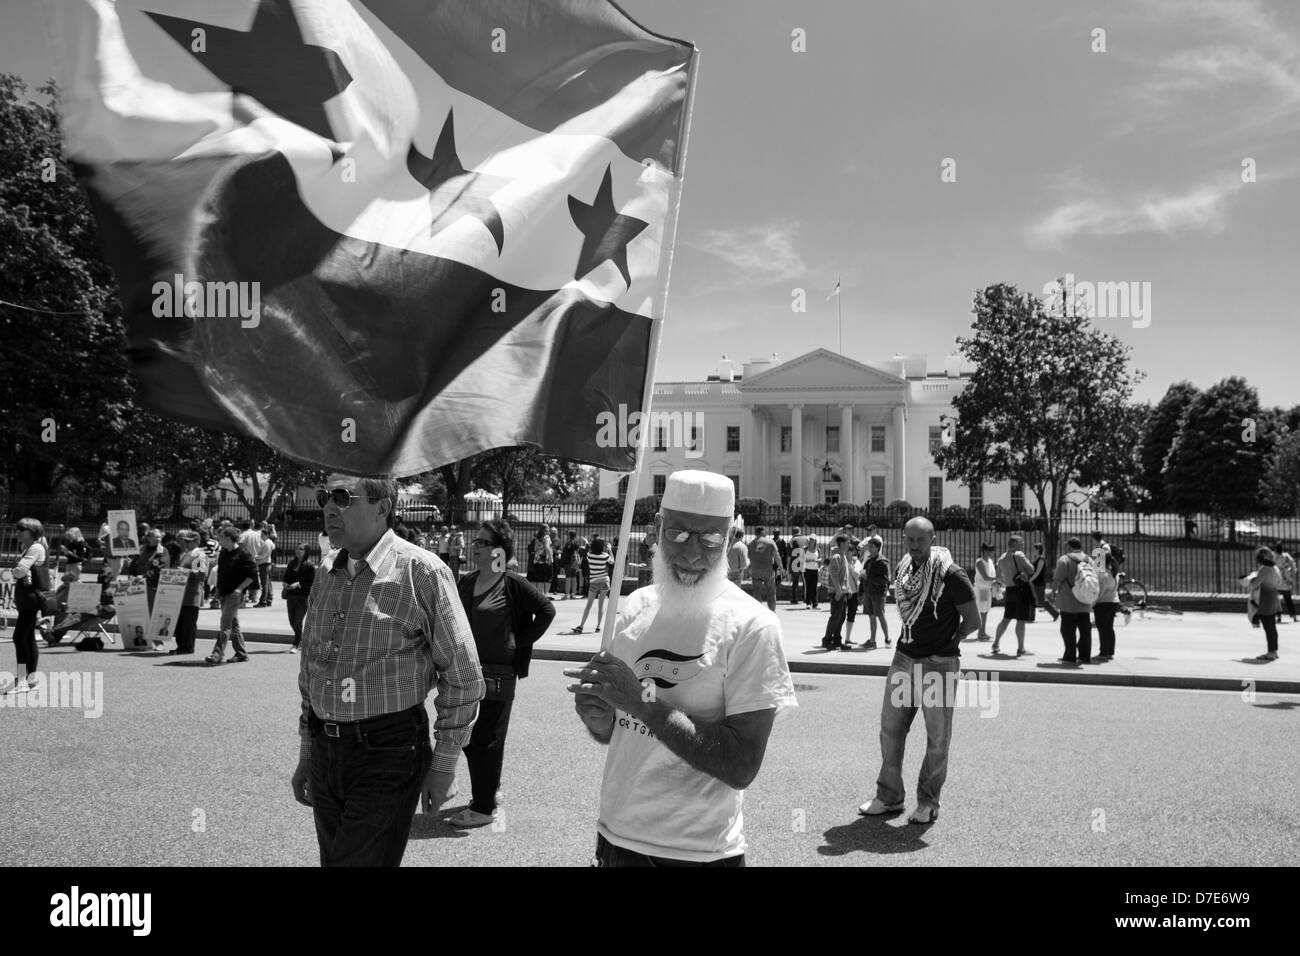 Syrians in front of the White House to express anger and protest - Washington, DC USA Stock Photo